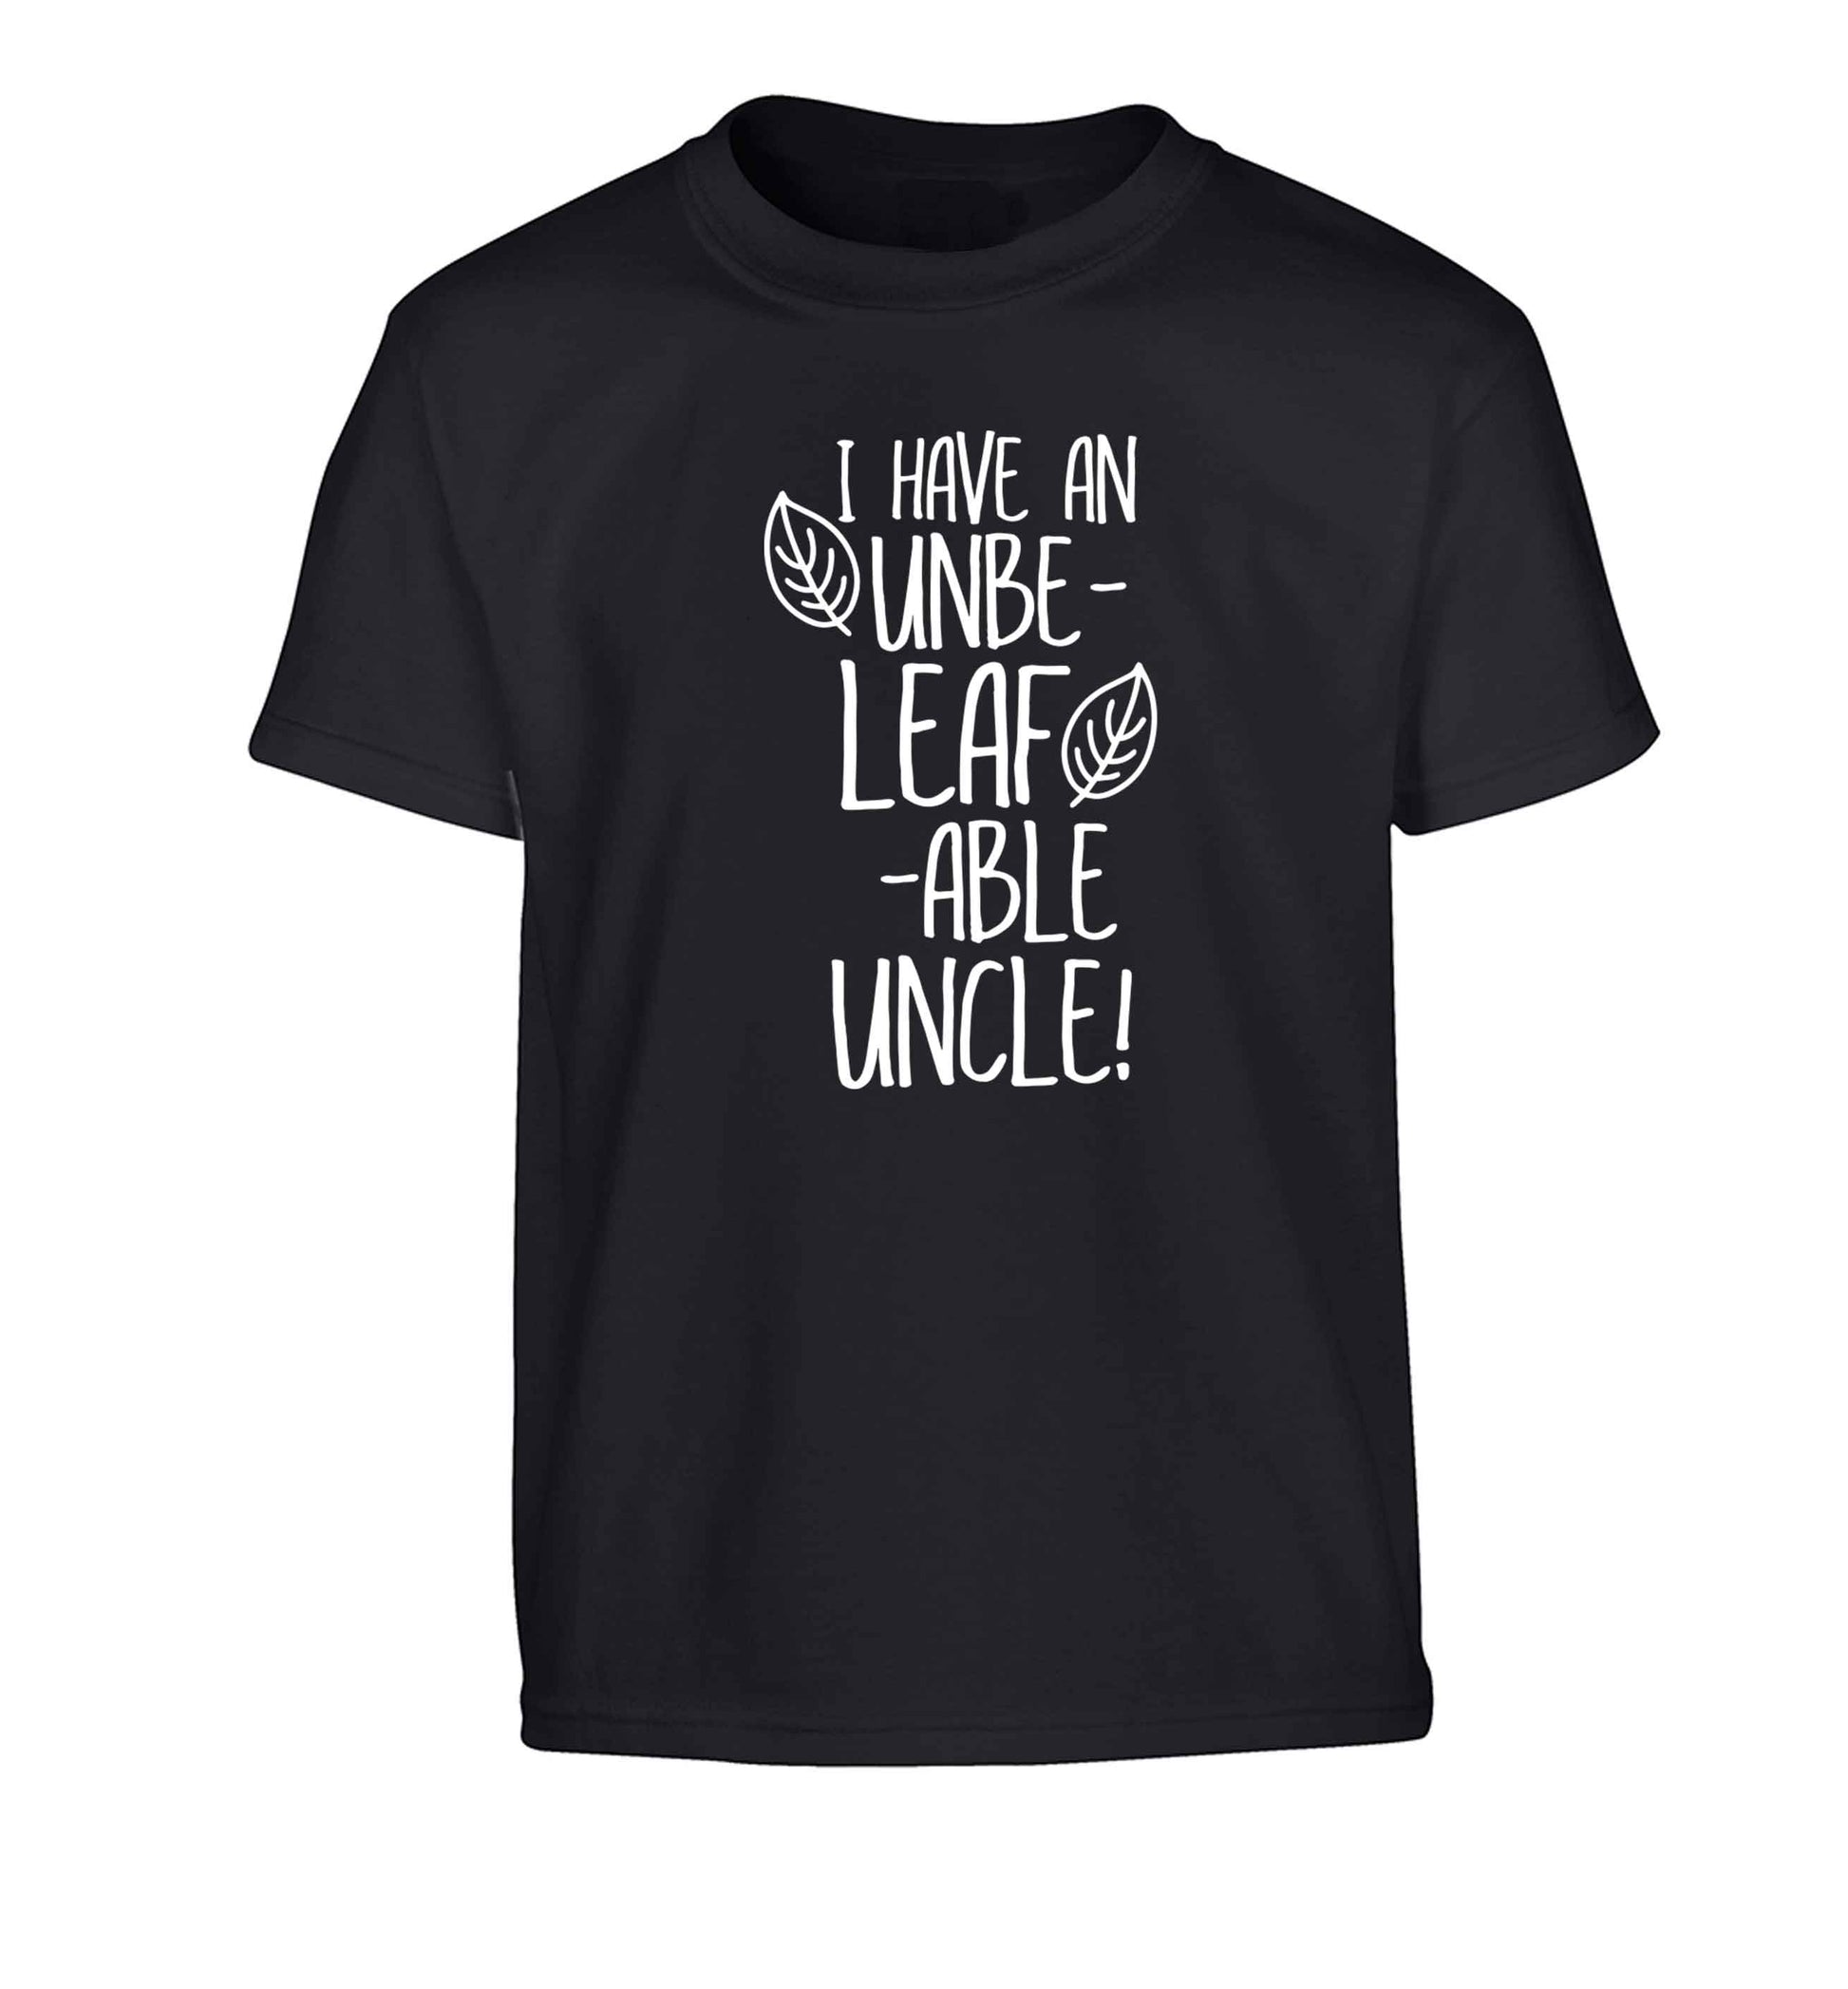 I have an unbe-leaf-able uncle Children's black Tshirt 12-13 Years